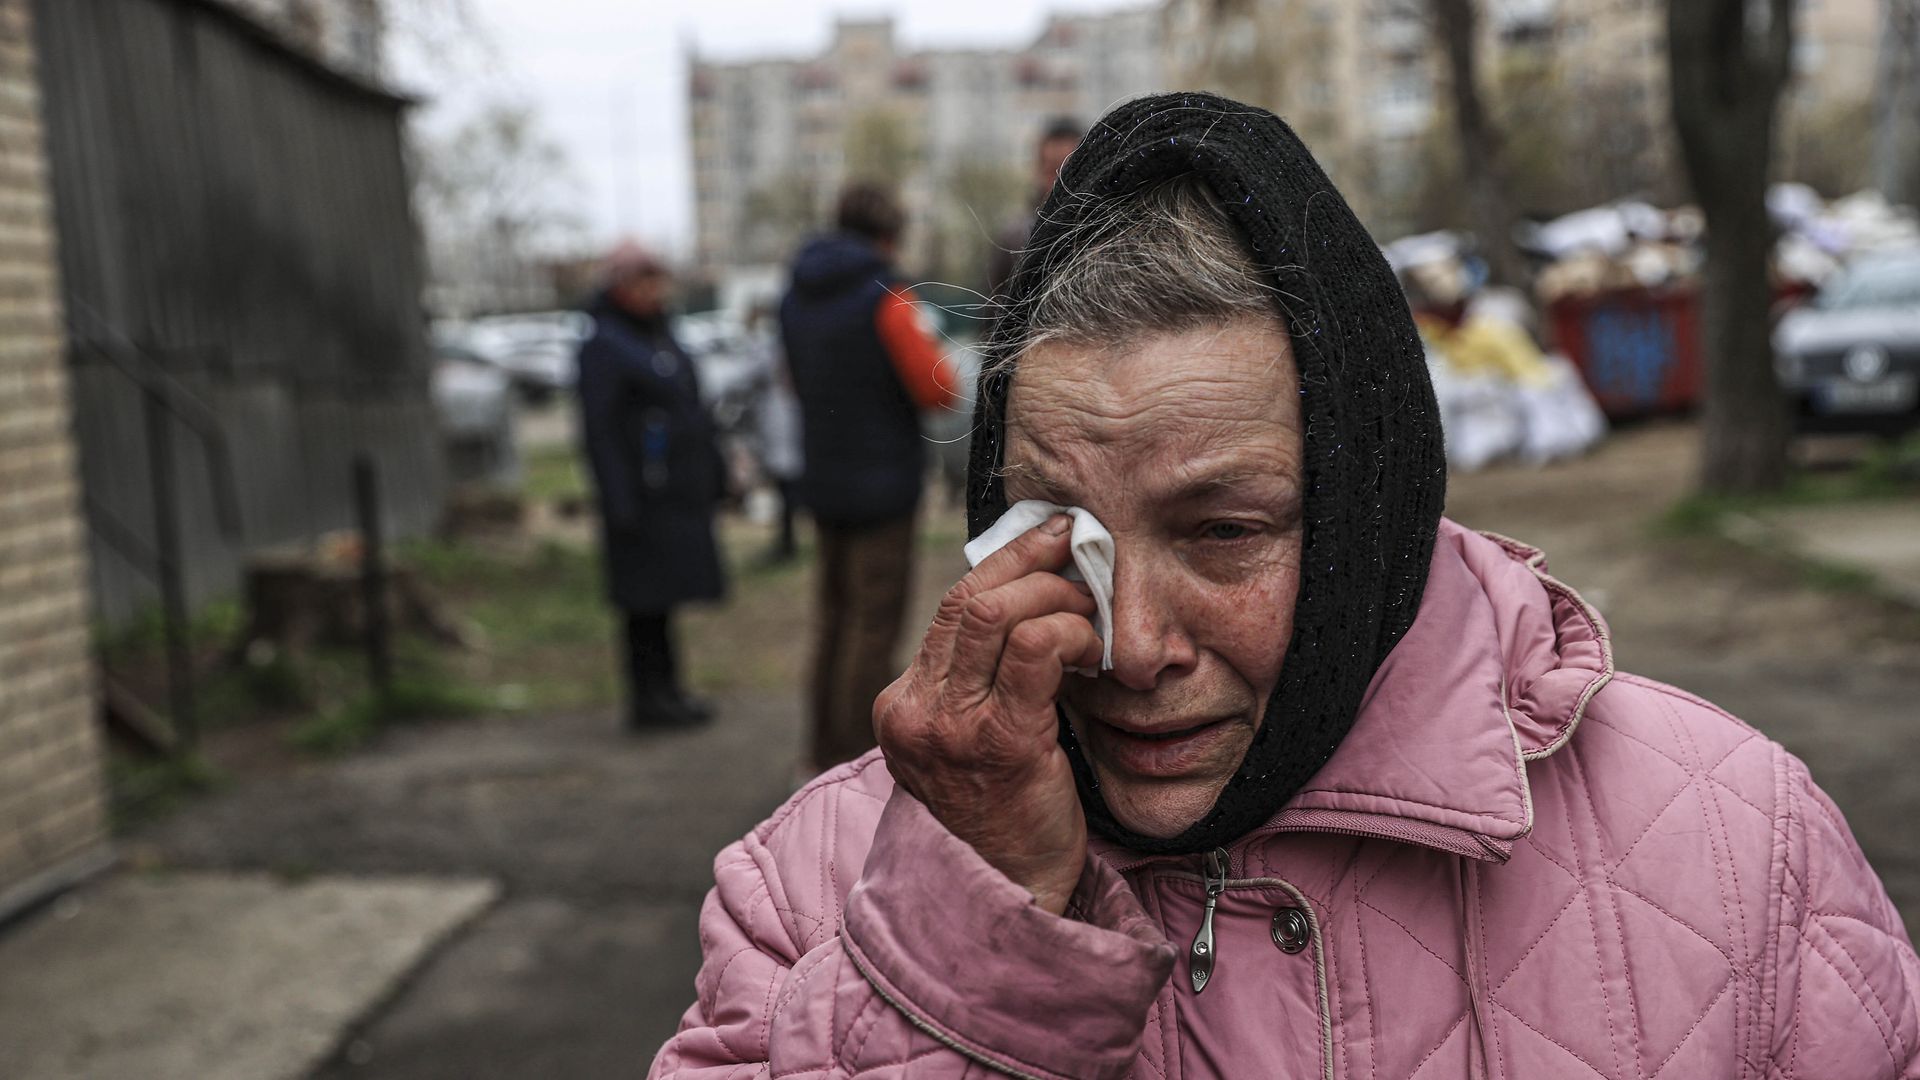 A relative, mourning, is seen as the burial of civilians allegedly killed by Russian troops continues at Bucha cemetery in Kyiv Oblast, Ukraine on April 20, 2022. 